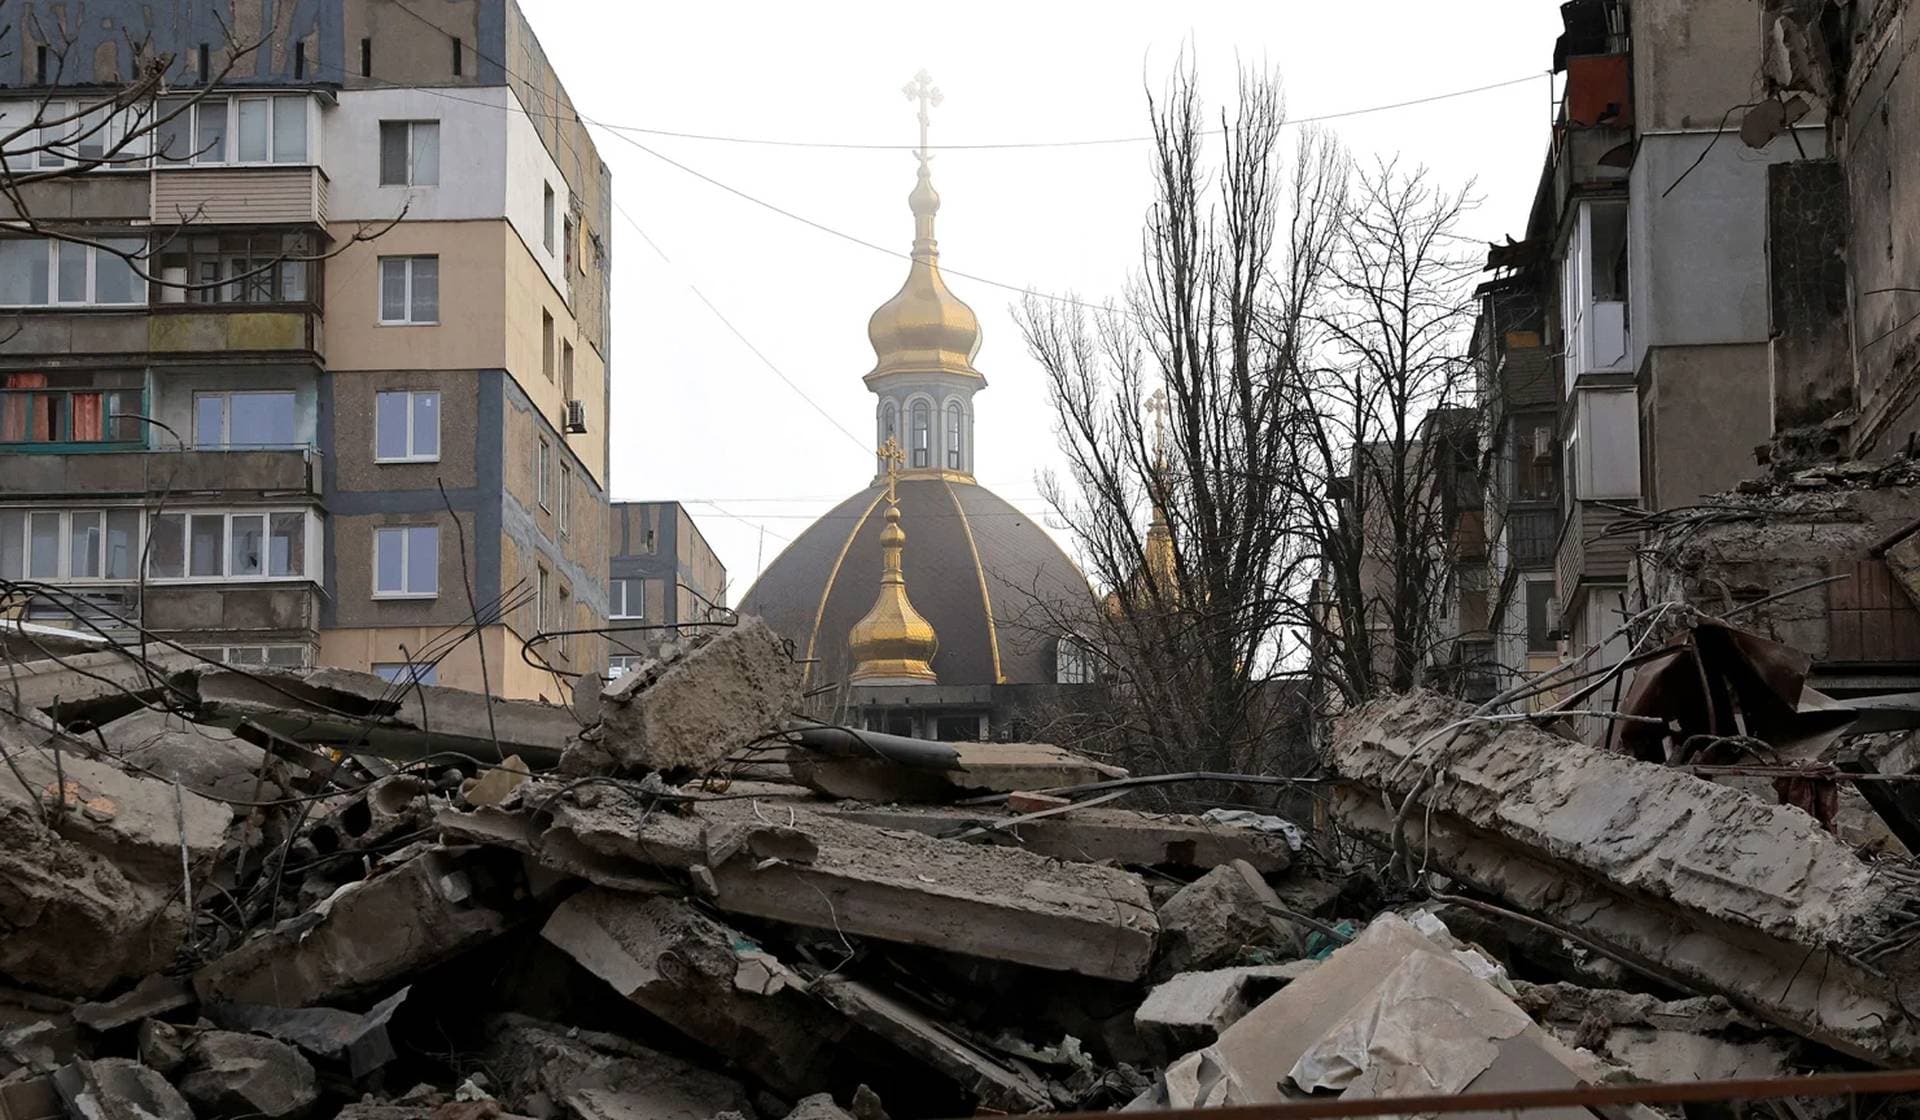 The dome of an Orthodox church seen behind a destroyed building in Mariupol